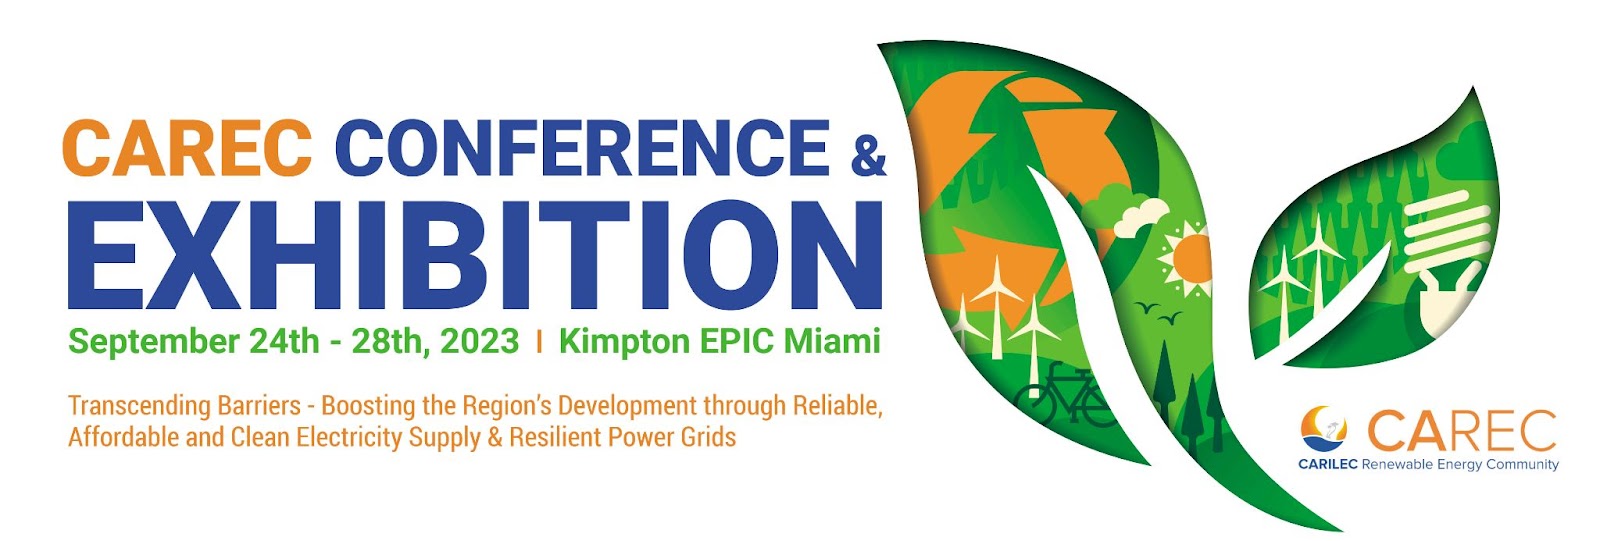 CAREC 2023: Charting the Future of Caribbean Energy